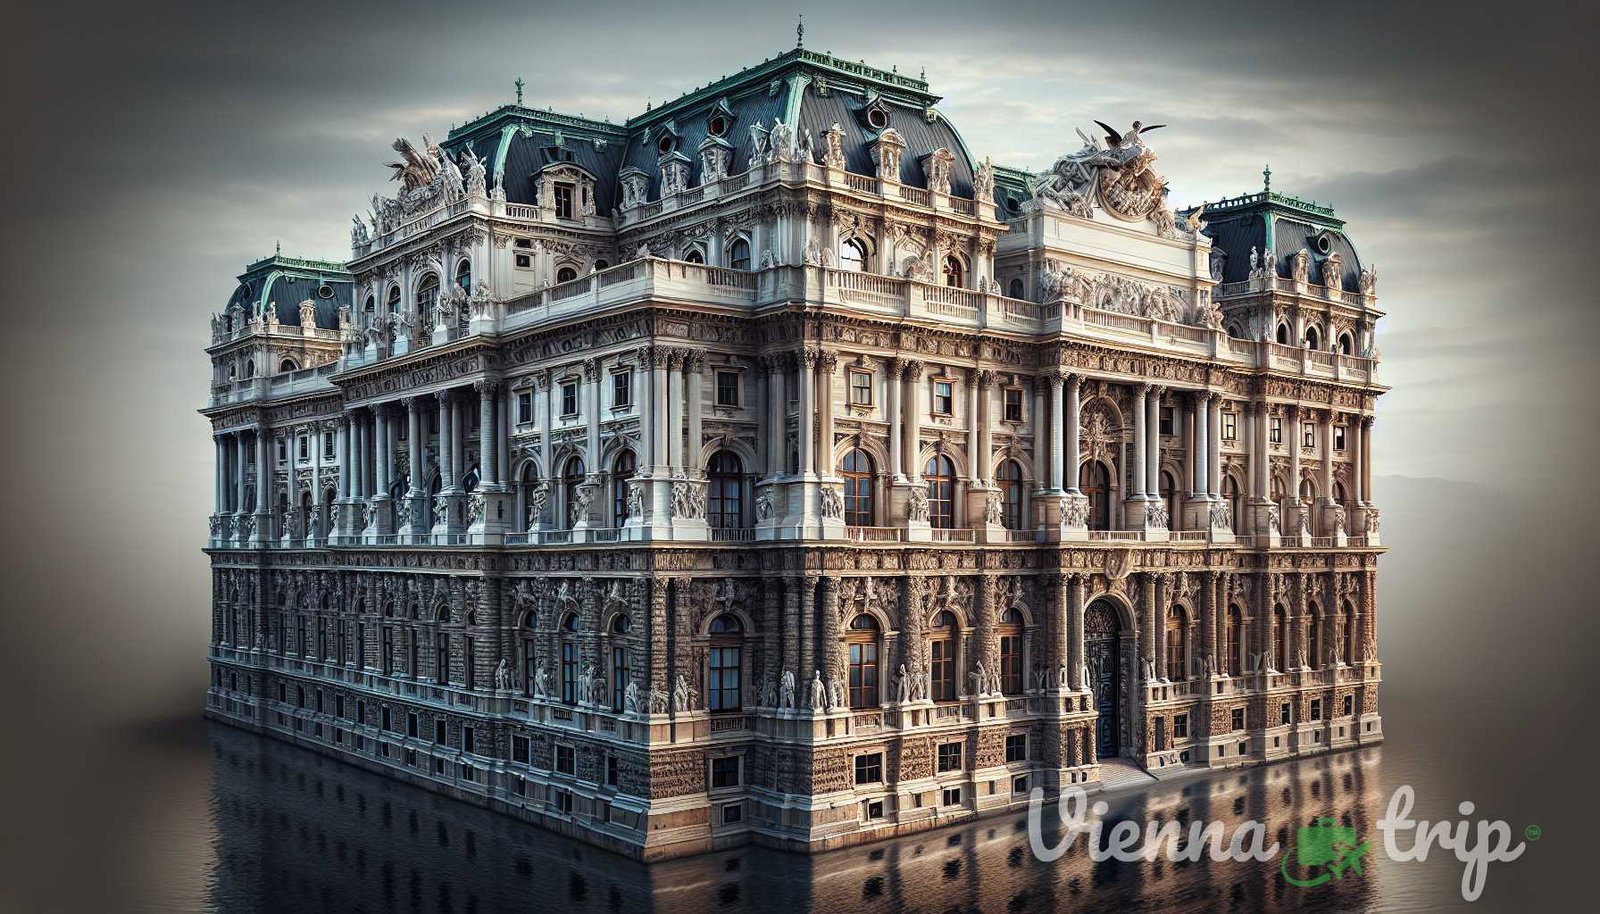 Illustration for section: The Hofburg Palace, located in the heart of Vienna, is one of the city's most iconic landmarks. Whil - viennas secrets